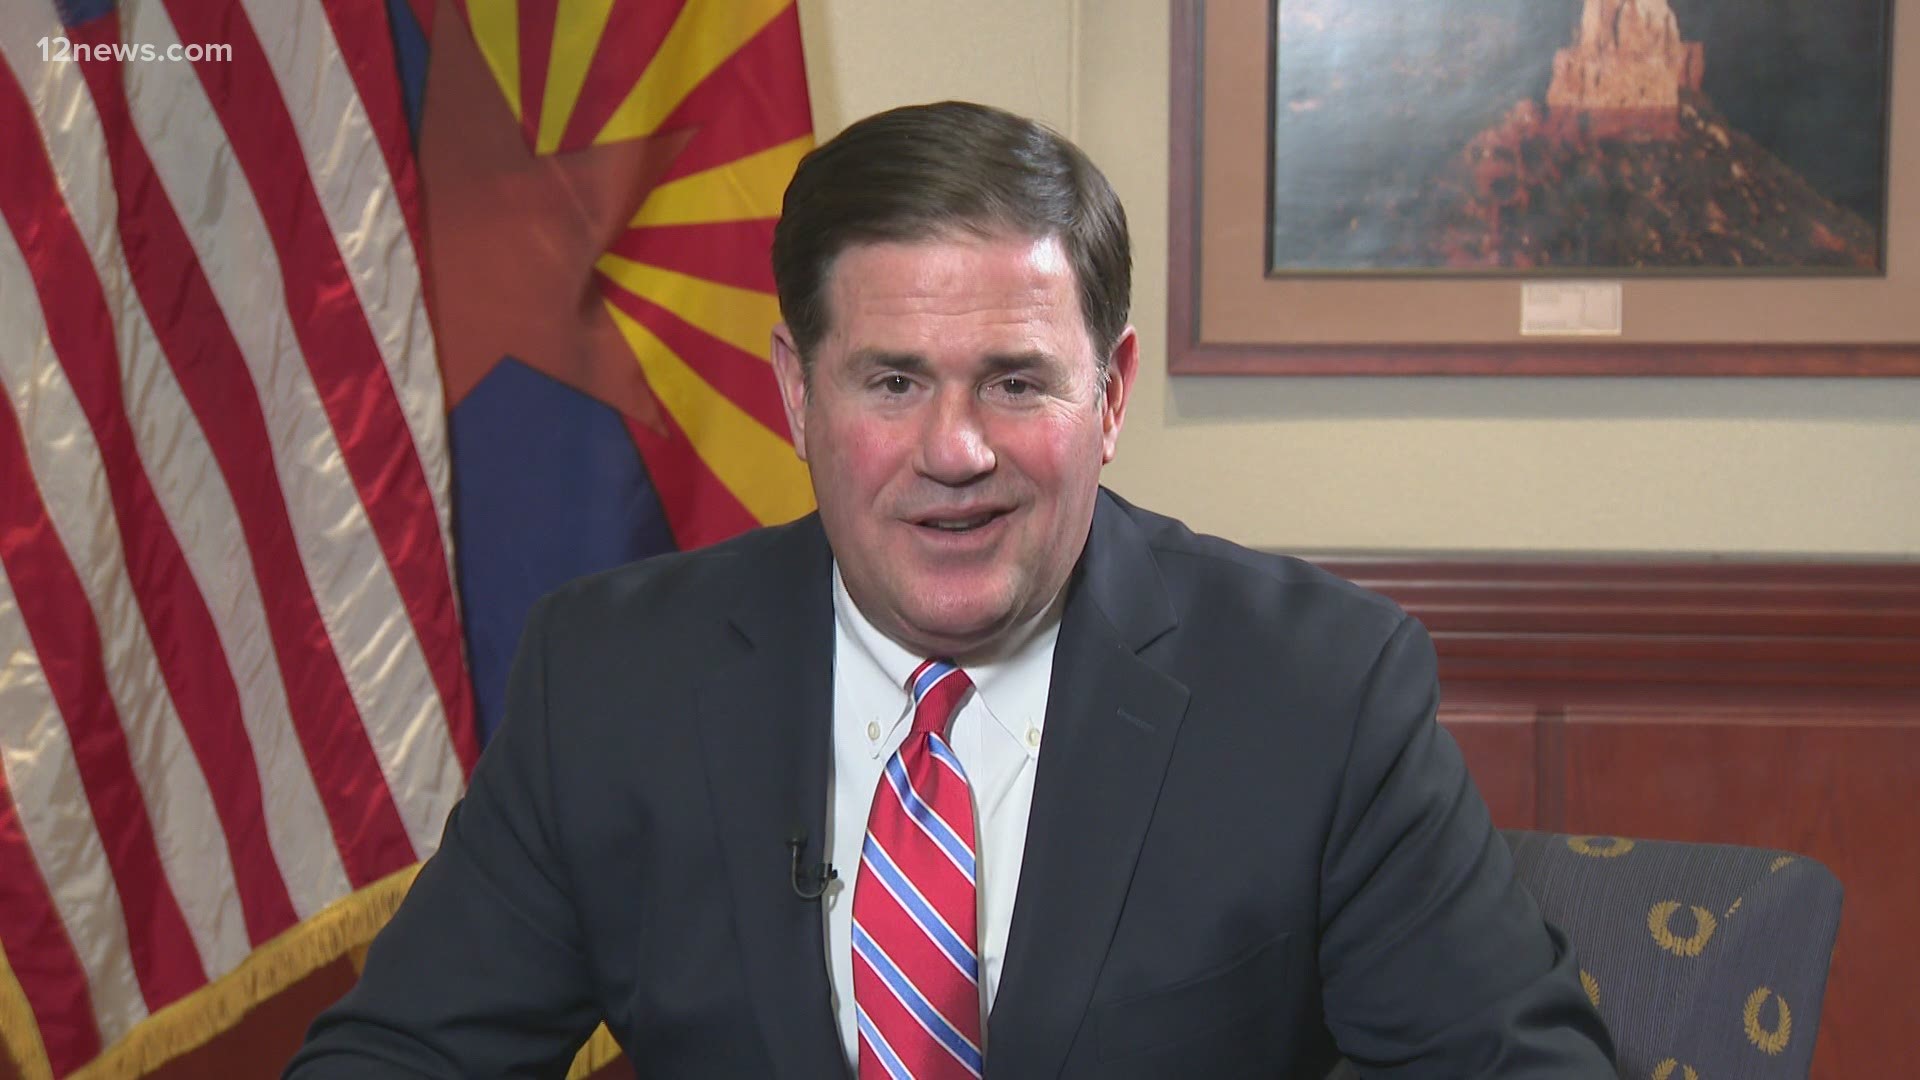 Arizona's Governor Doug Ducey answered 12 News viewer's questions about his decision to open occupancy levels in restaurants and the state's education system.